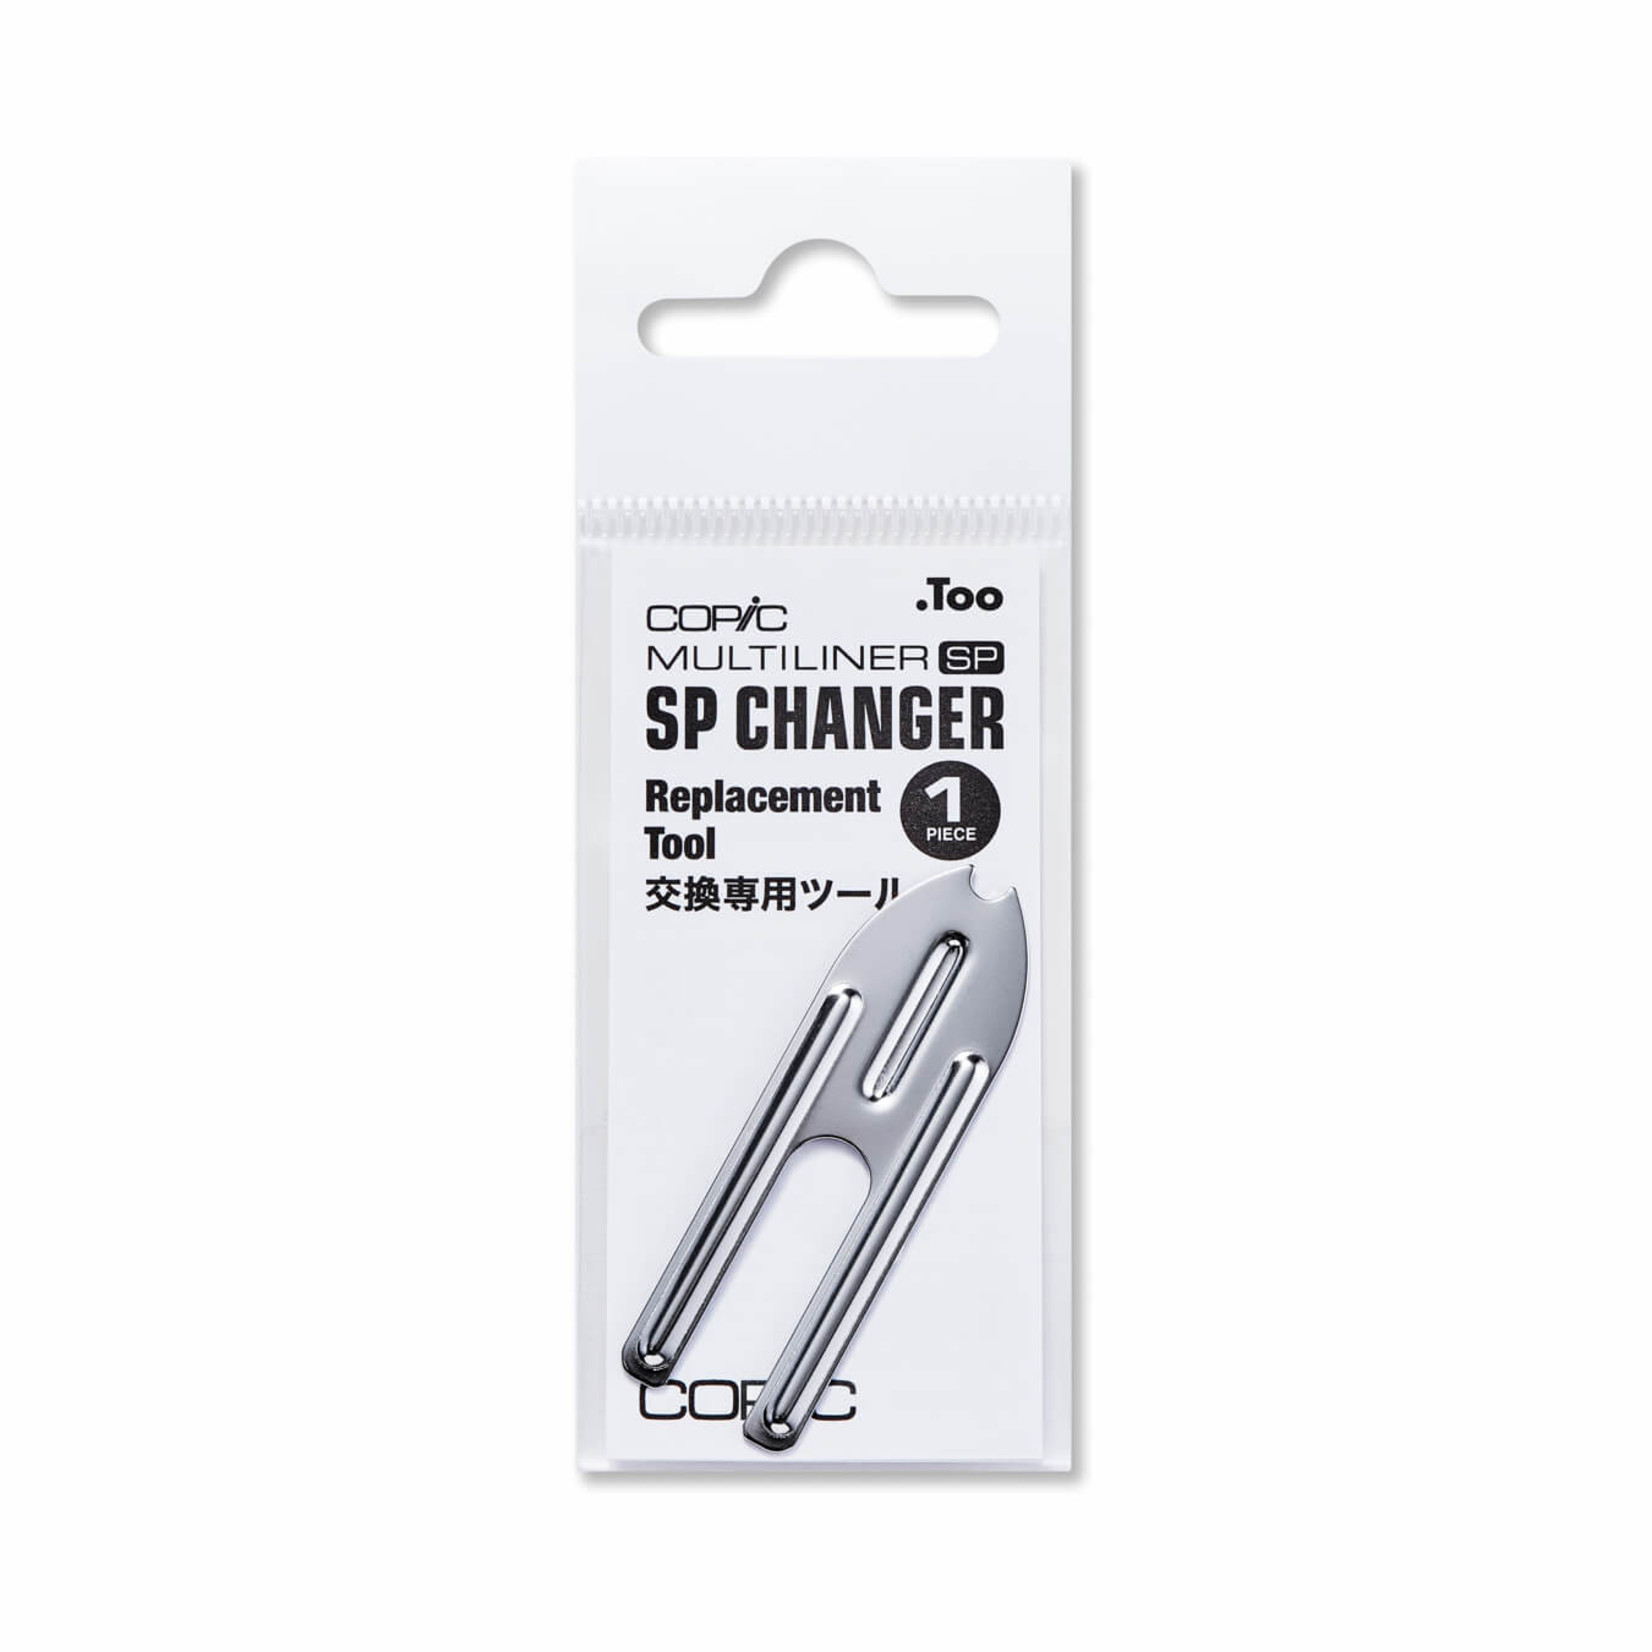 COPIC COPIC SP CHANGER REPLACEMENT TOOL